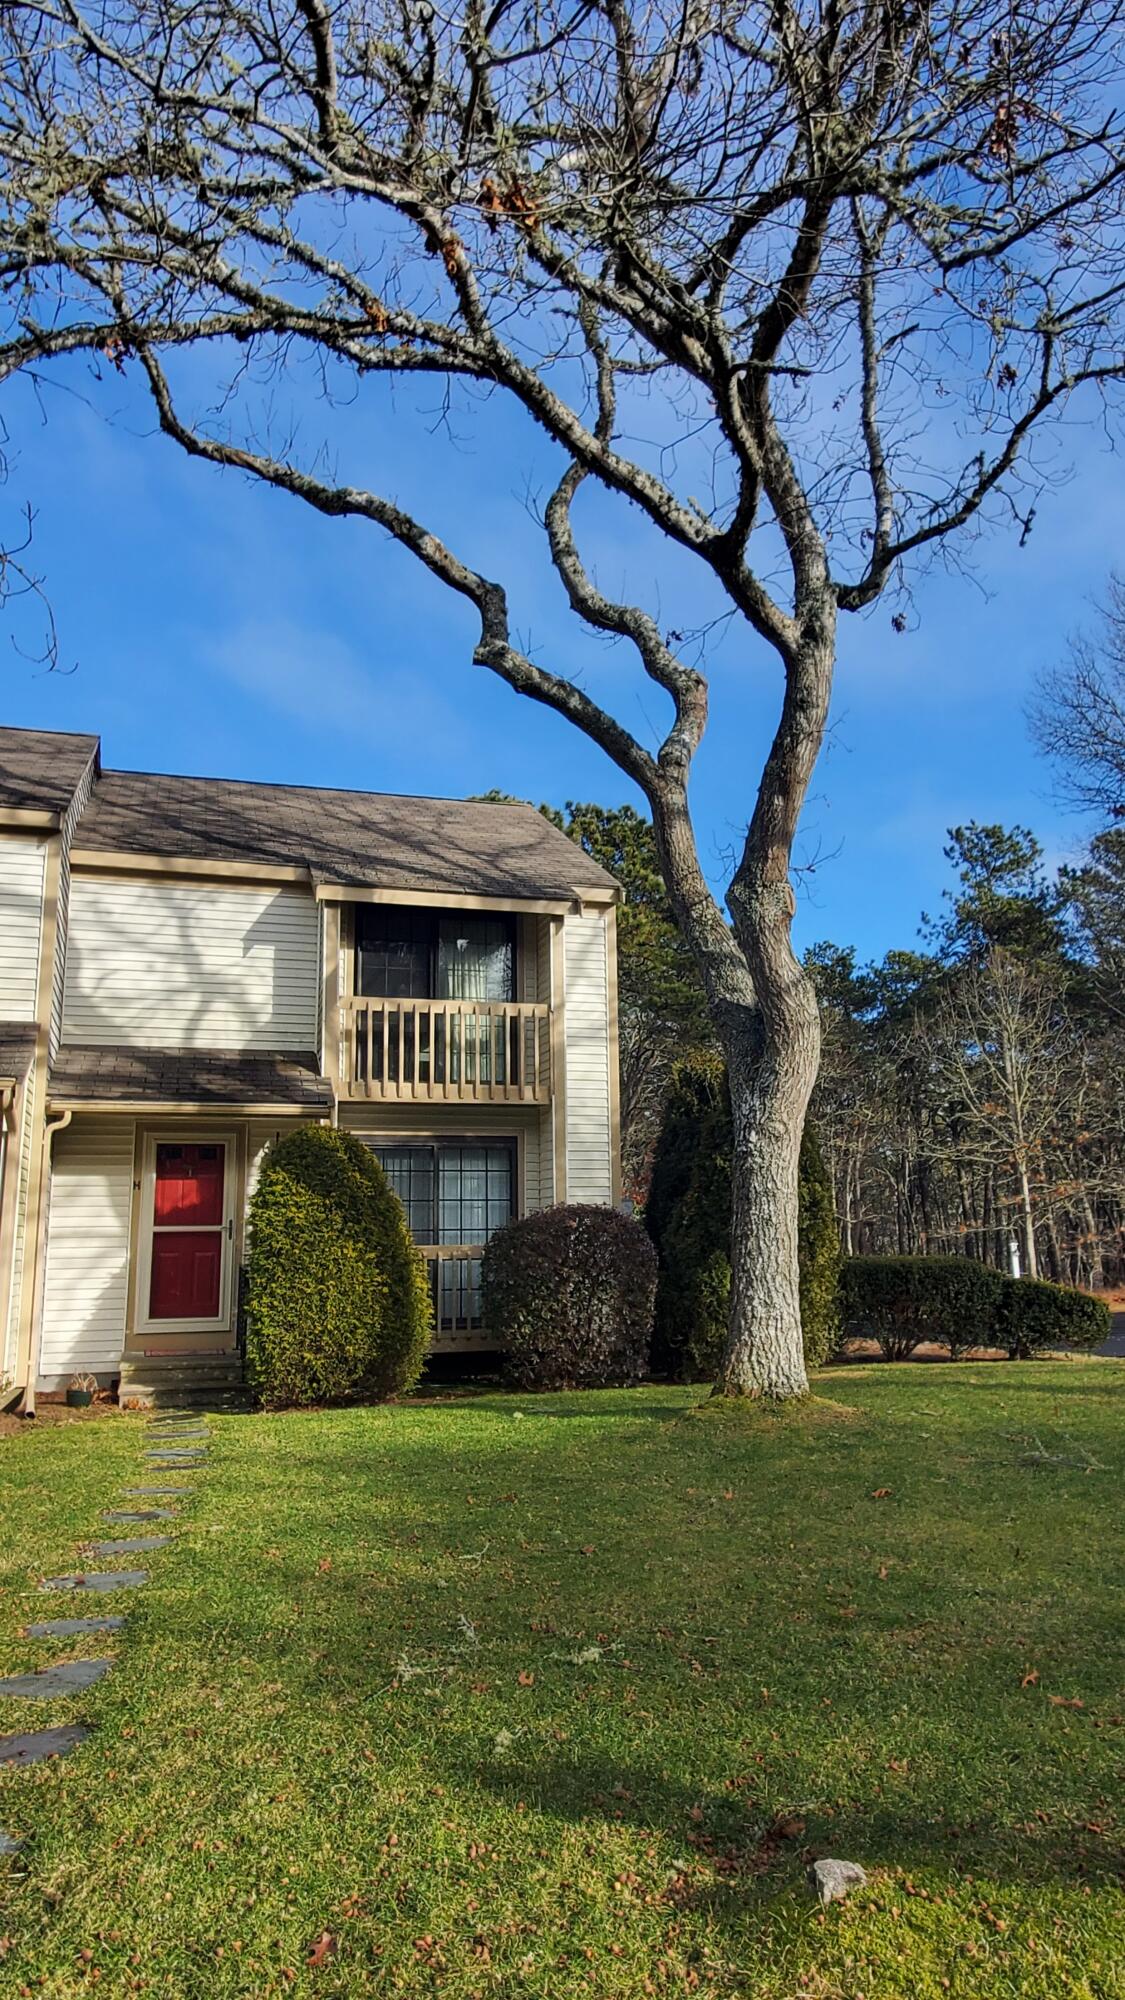 992 MA-134 # H, Dennis, Massachusetts 02638, 2 Bedrooms Bedrooms, 4 Rooms Rooms,1 BathroomBathrooms,Residential,For Sale,Oak Run,992 MA-134 # H,22400449